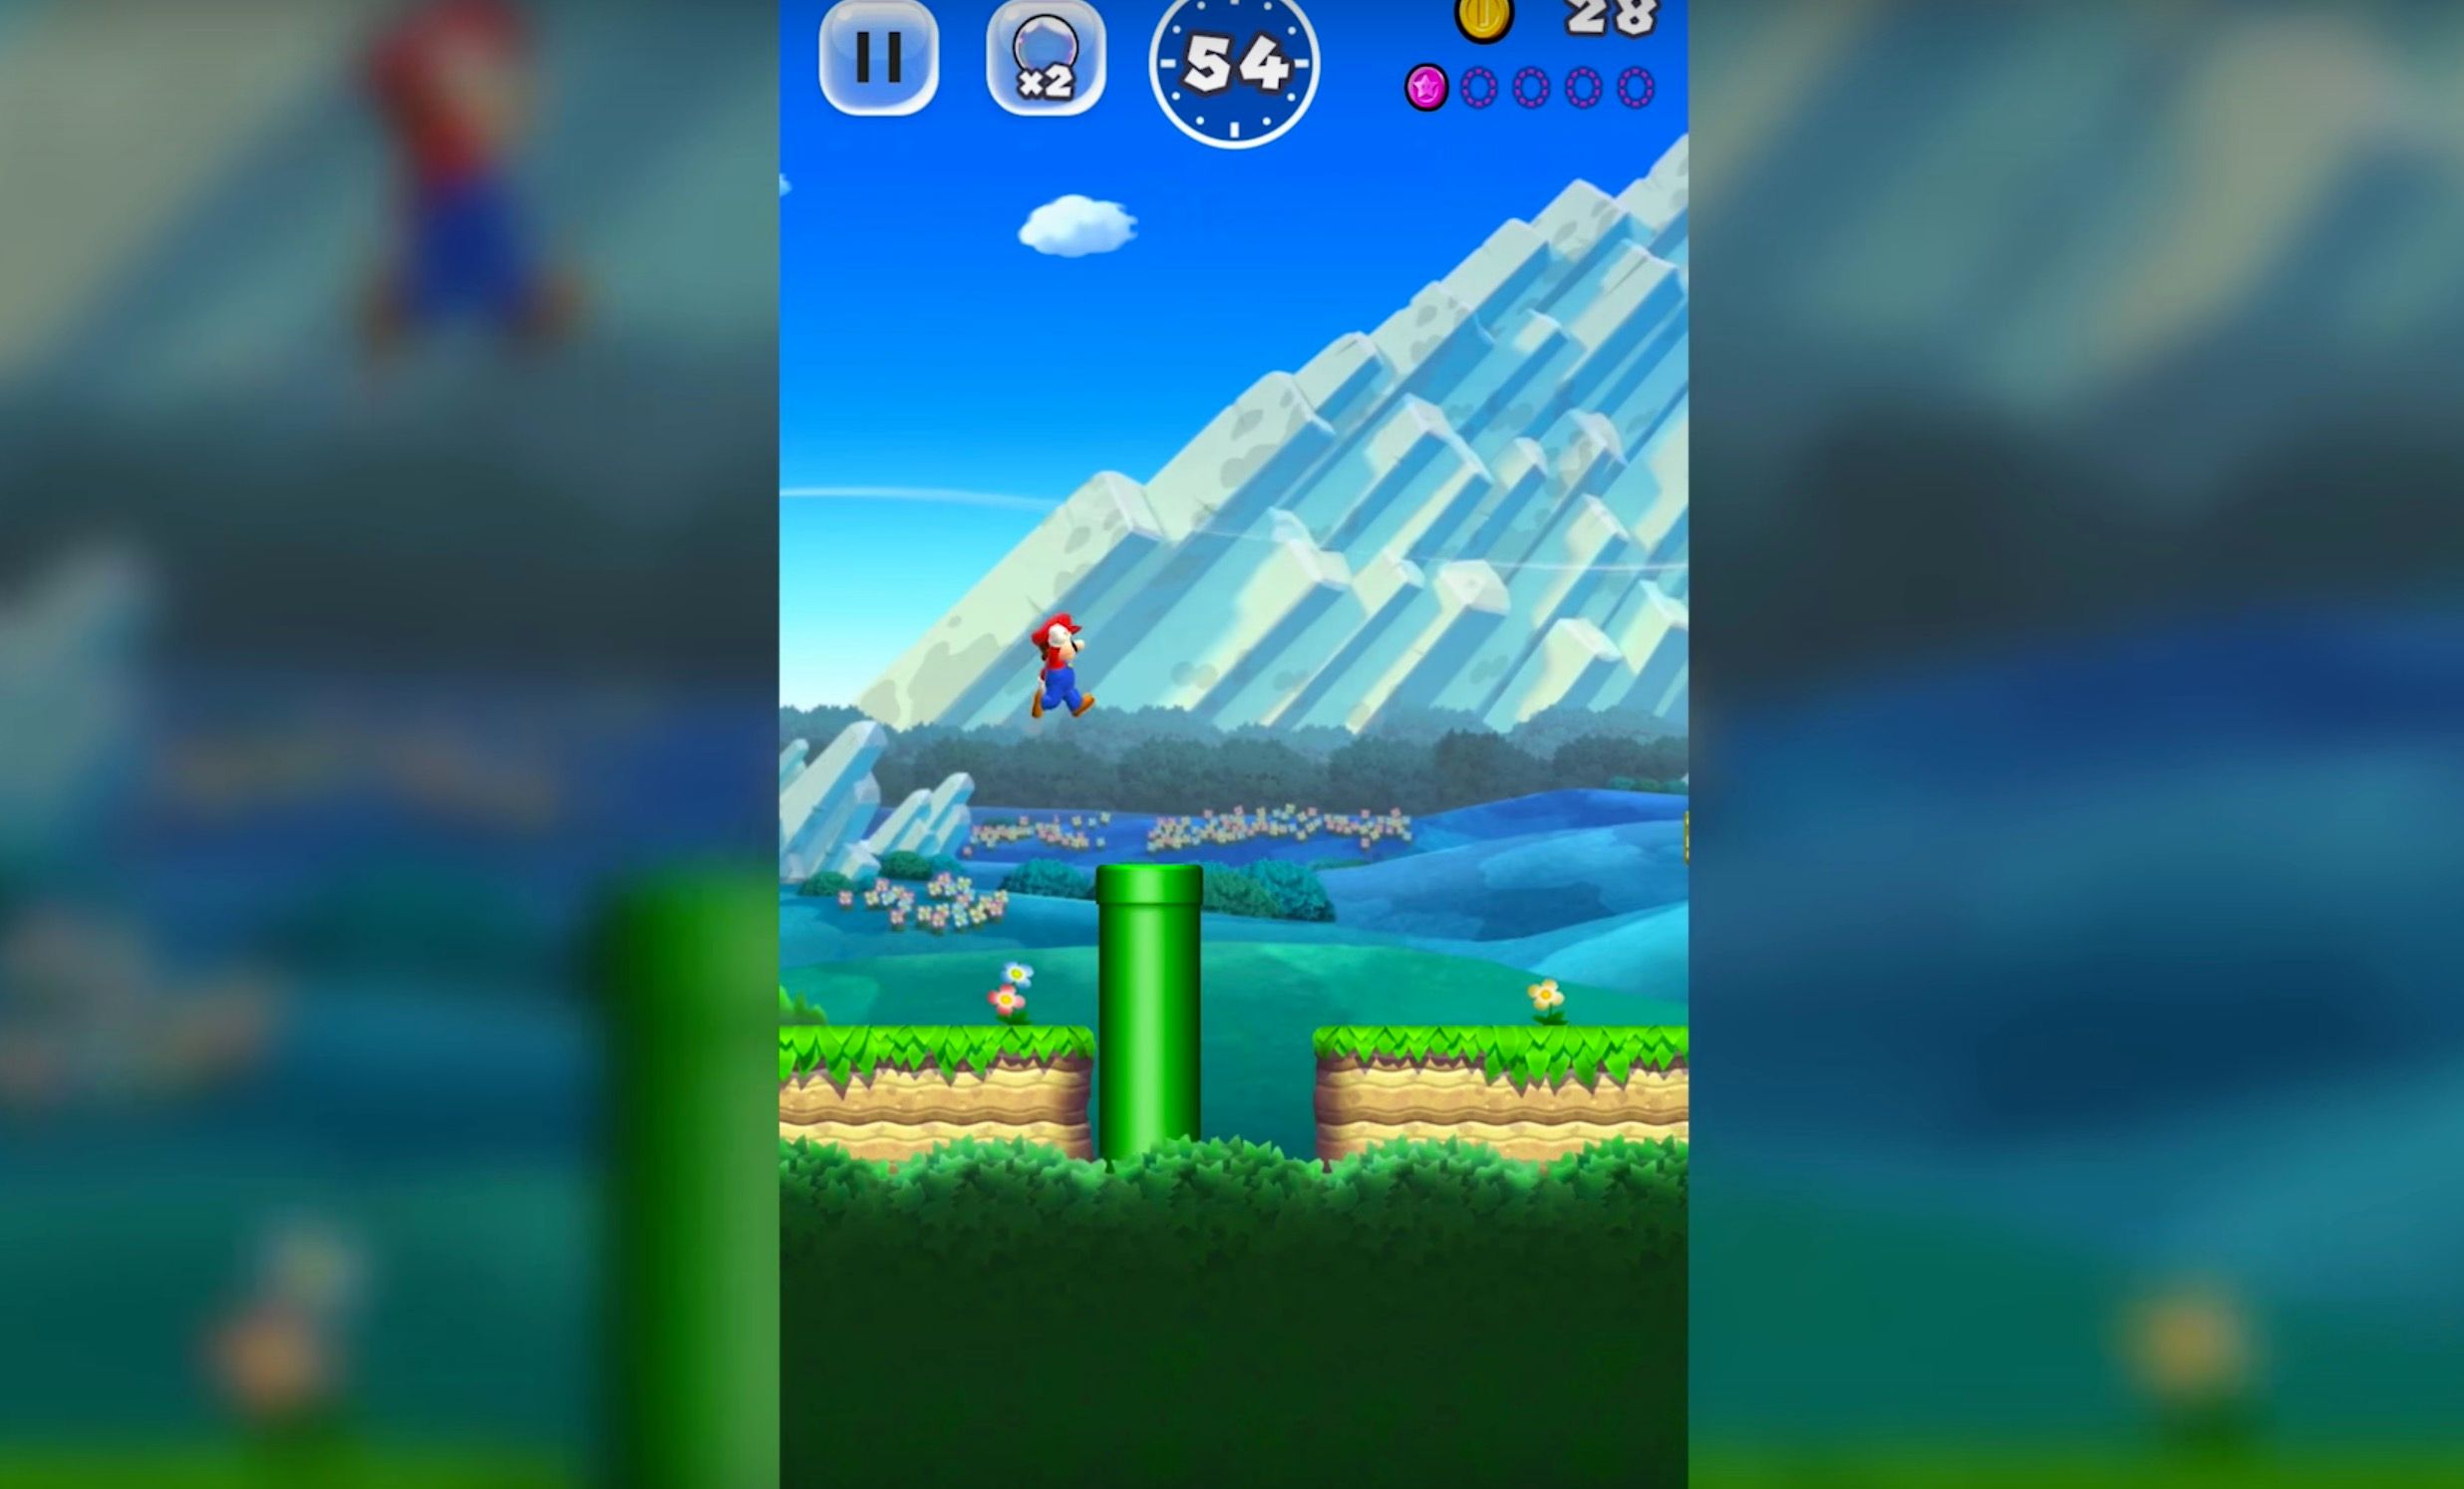 super mario run for android finally available on google play store image 1